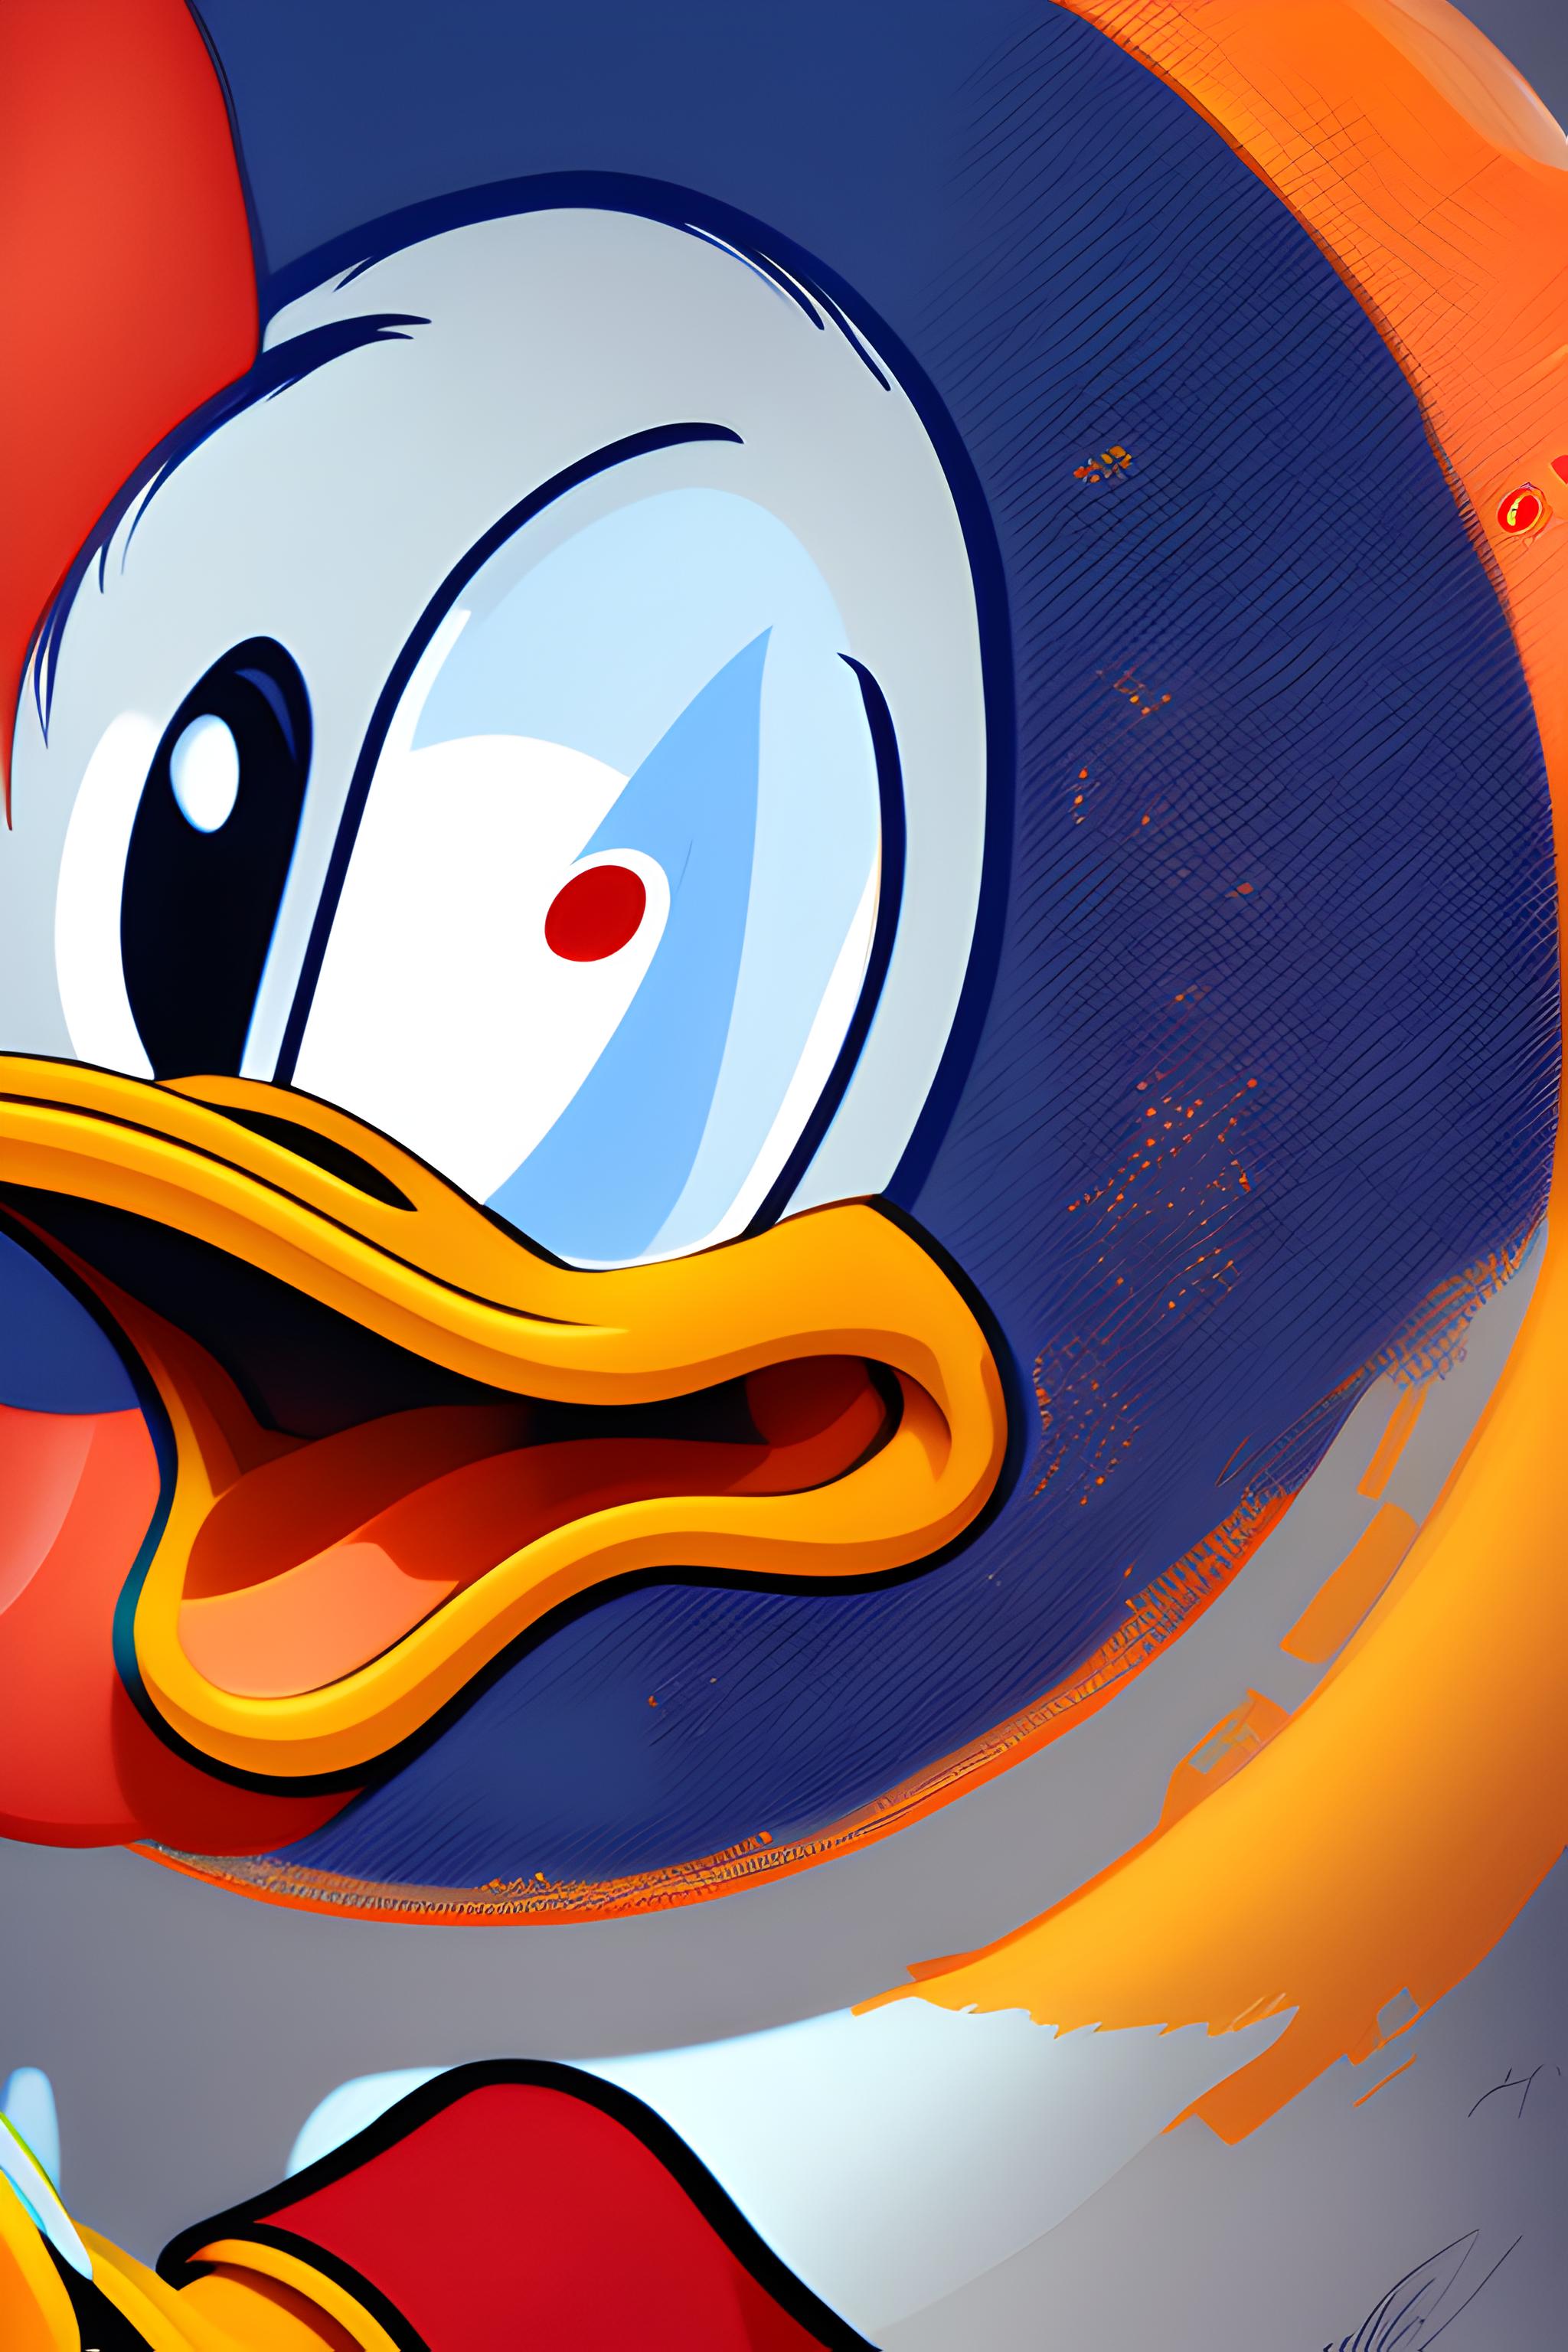 Donald Duck in space